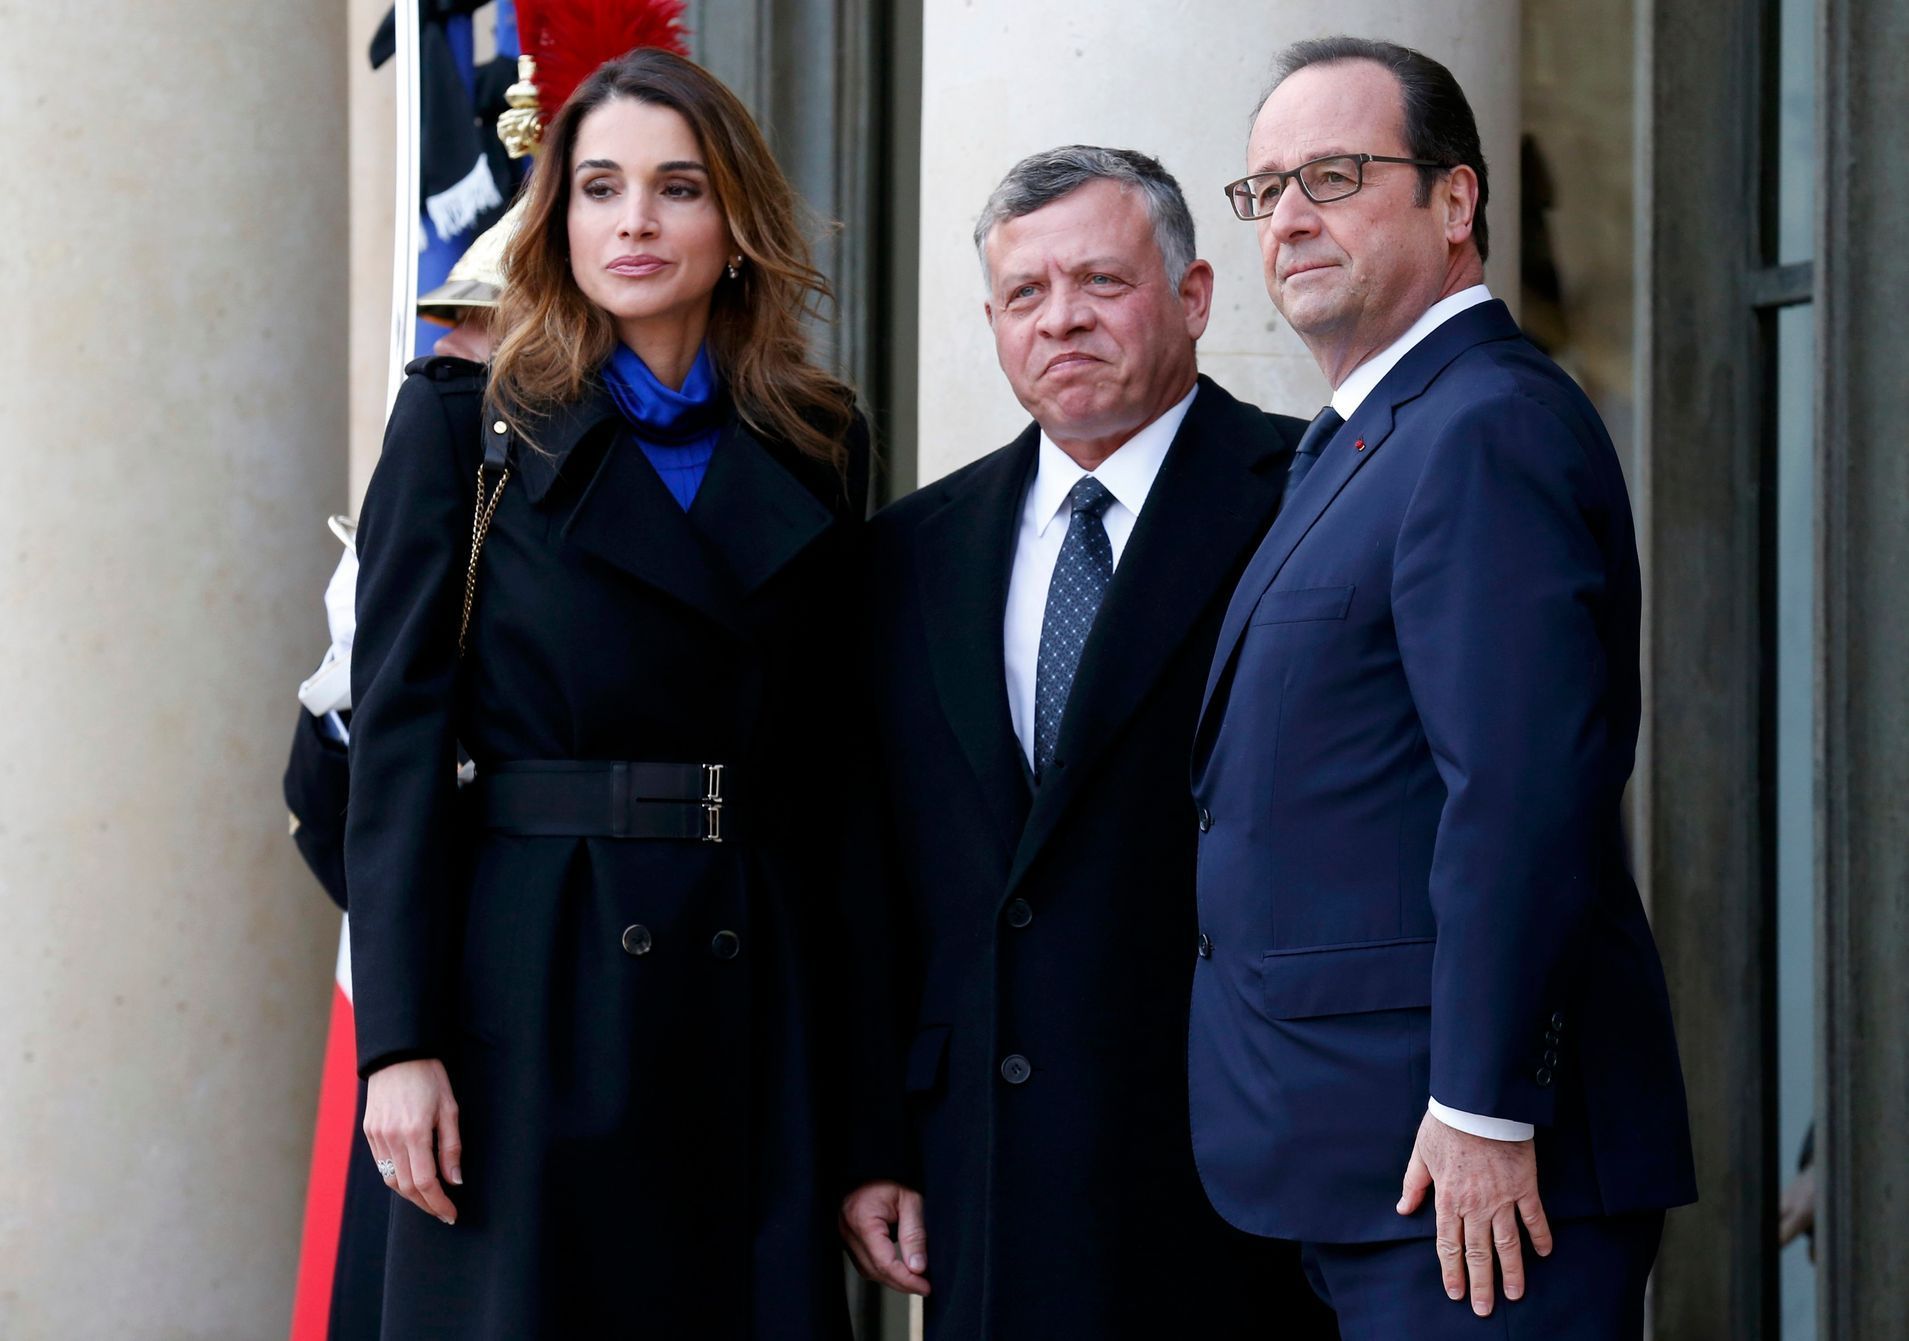 French President Francois Hollande welcomes Jordan's King Abdullah and his wife Queen Rania at the Elysee Palace before attending a solidarity march in the streets of Paris